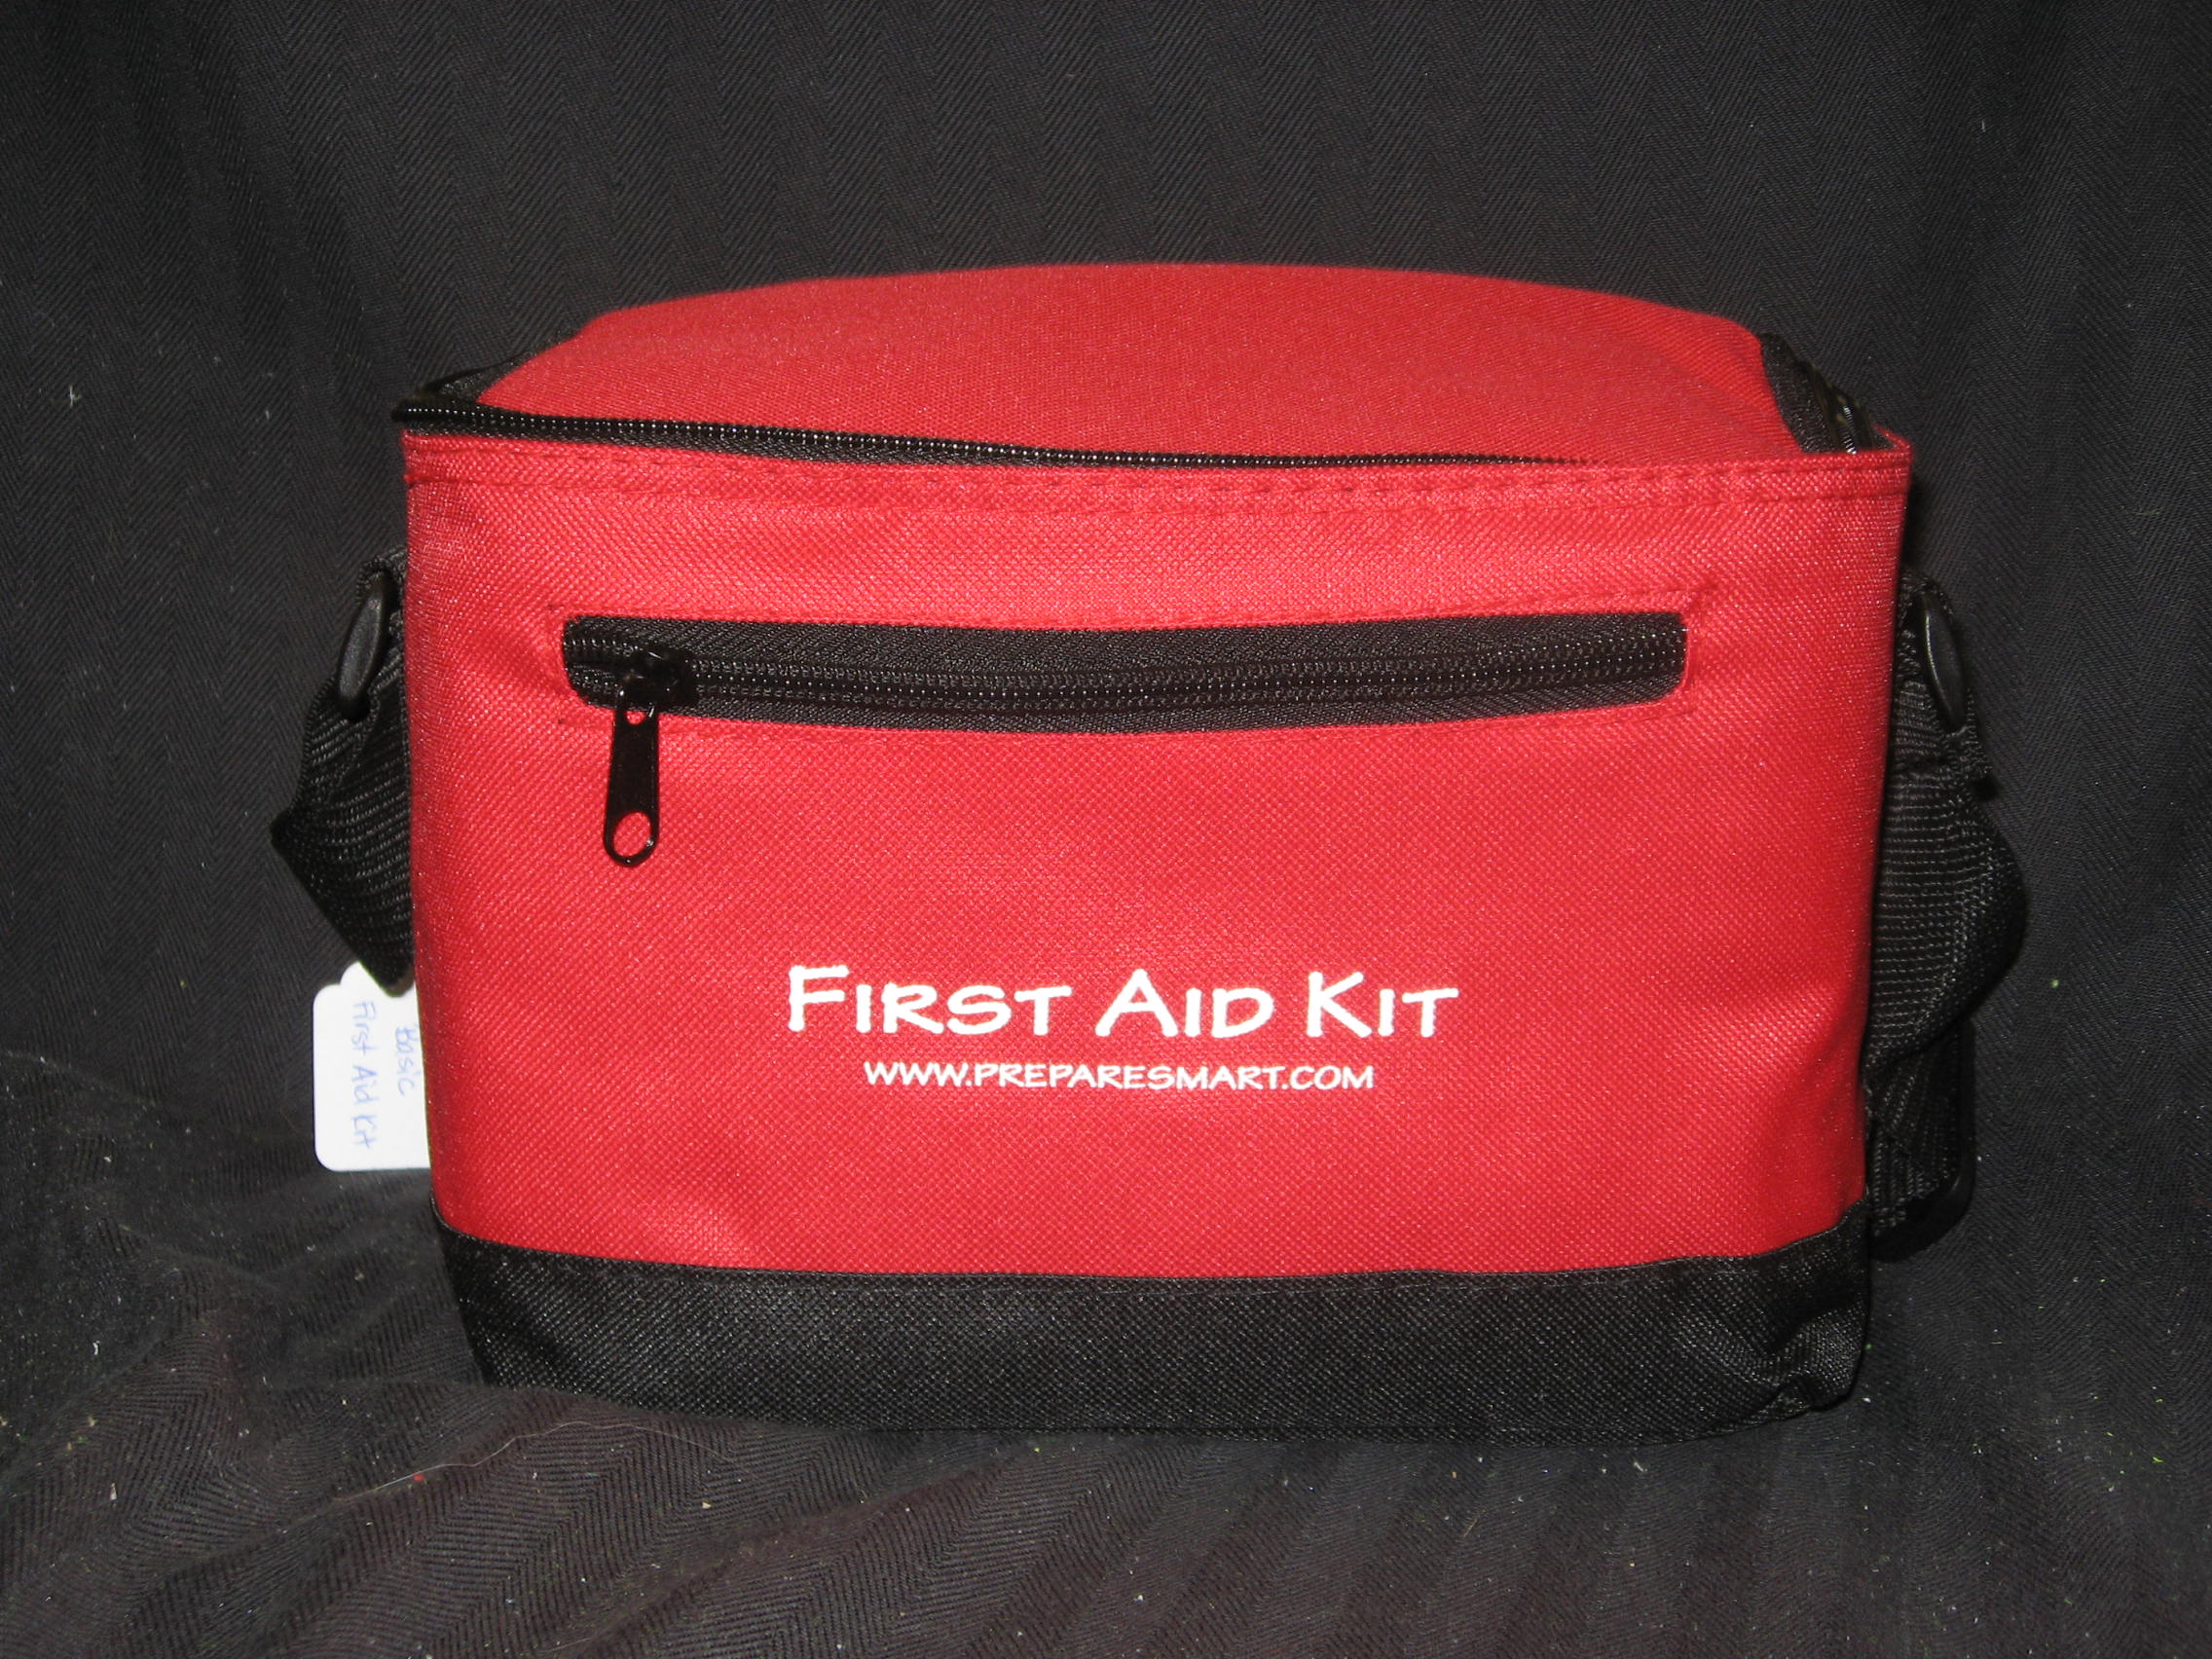 Red Bag with First Aid Kit Marking and Shoulder Strap